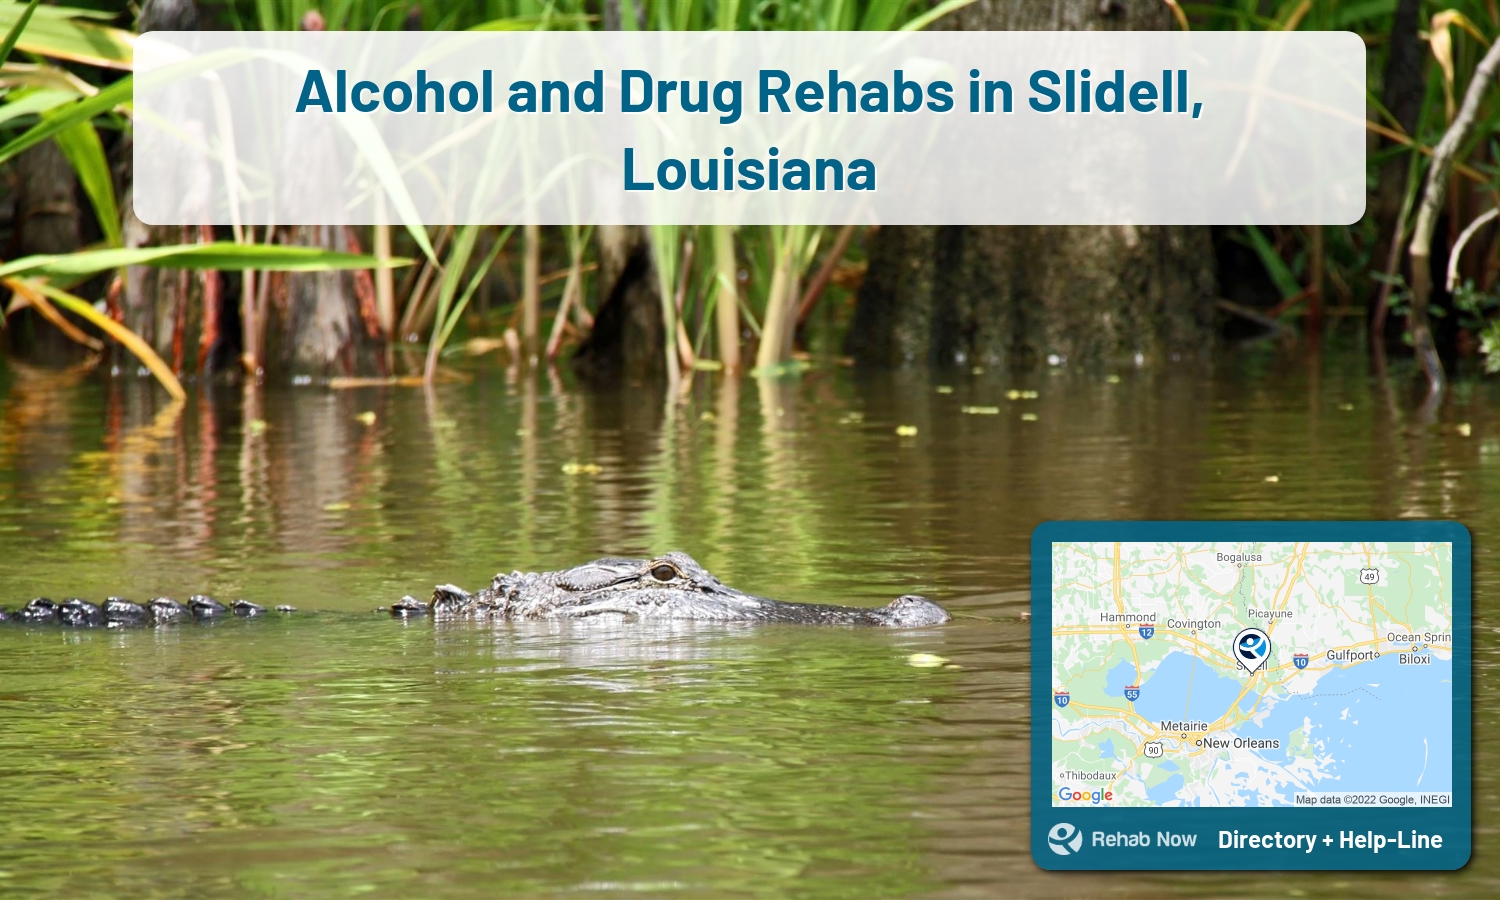 Slidell, LA Treatment Centers. Find drug rehab in Slidell, Louisiana, or detox and treatment programs. Get the right help now!